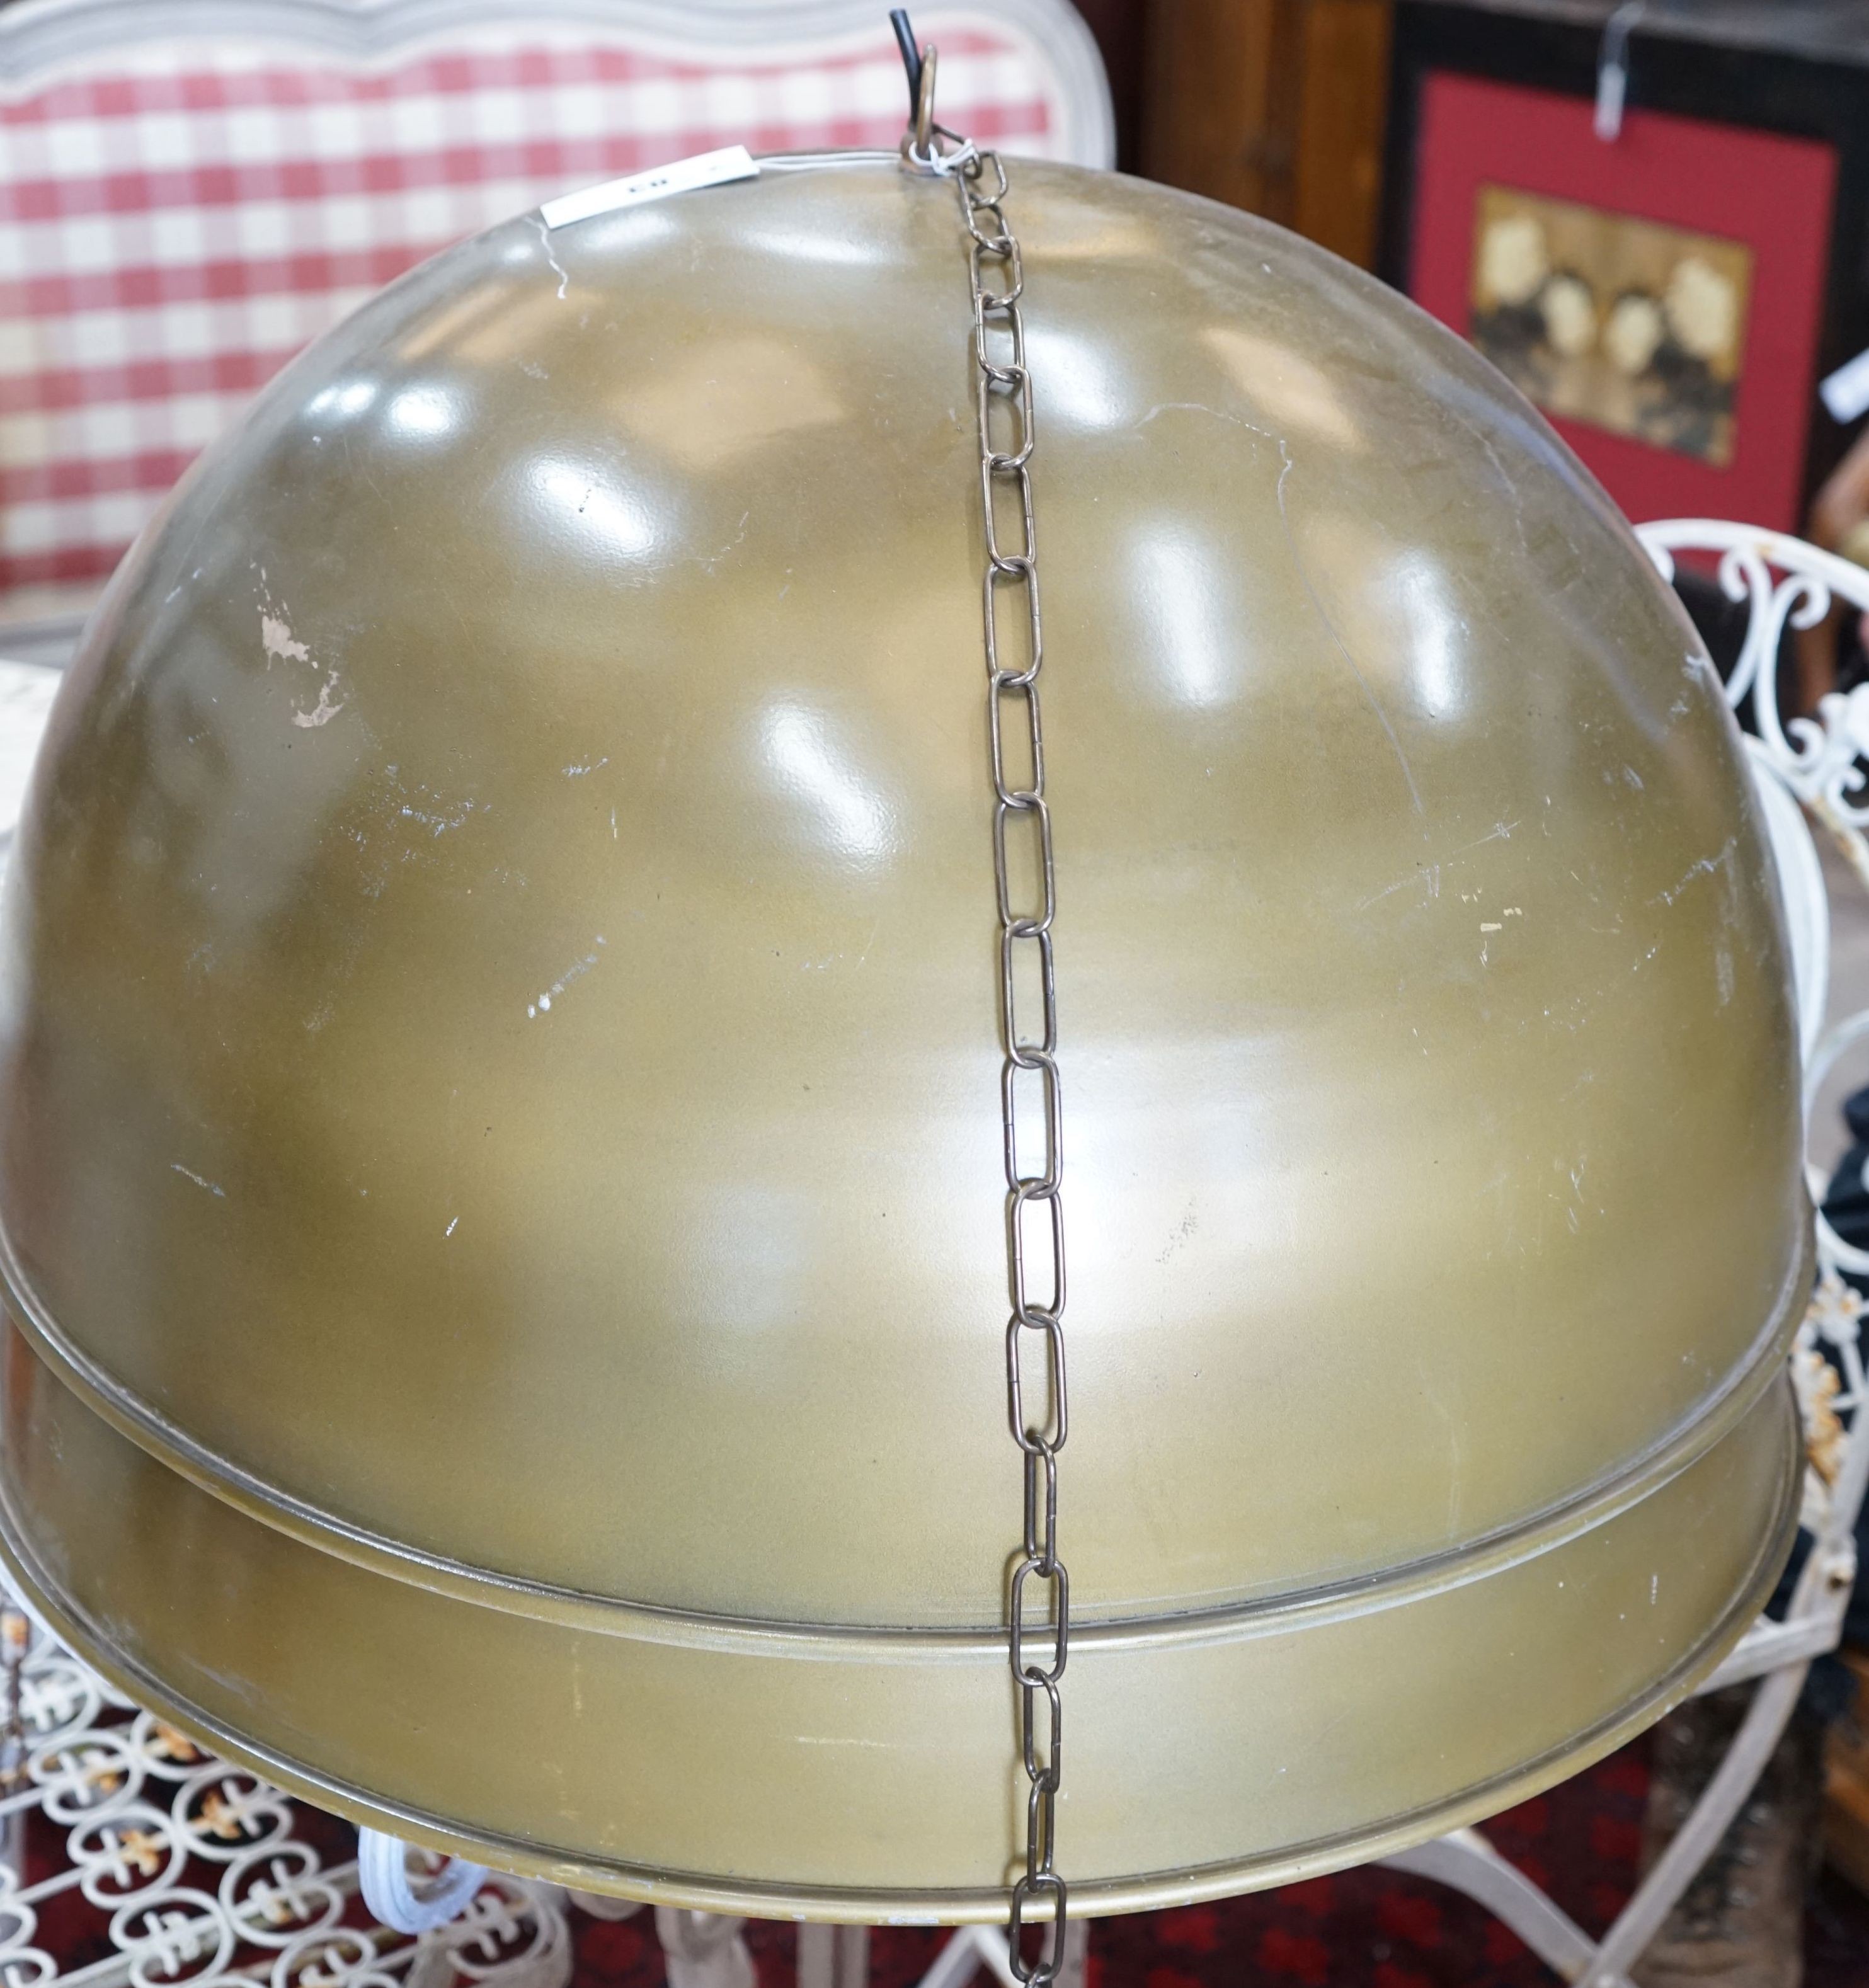 A pair of large circular ceiling shades, diameter approximately 70cm